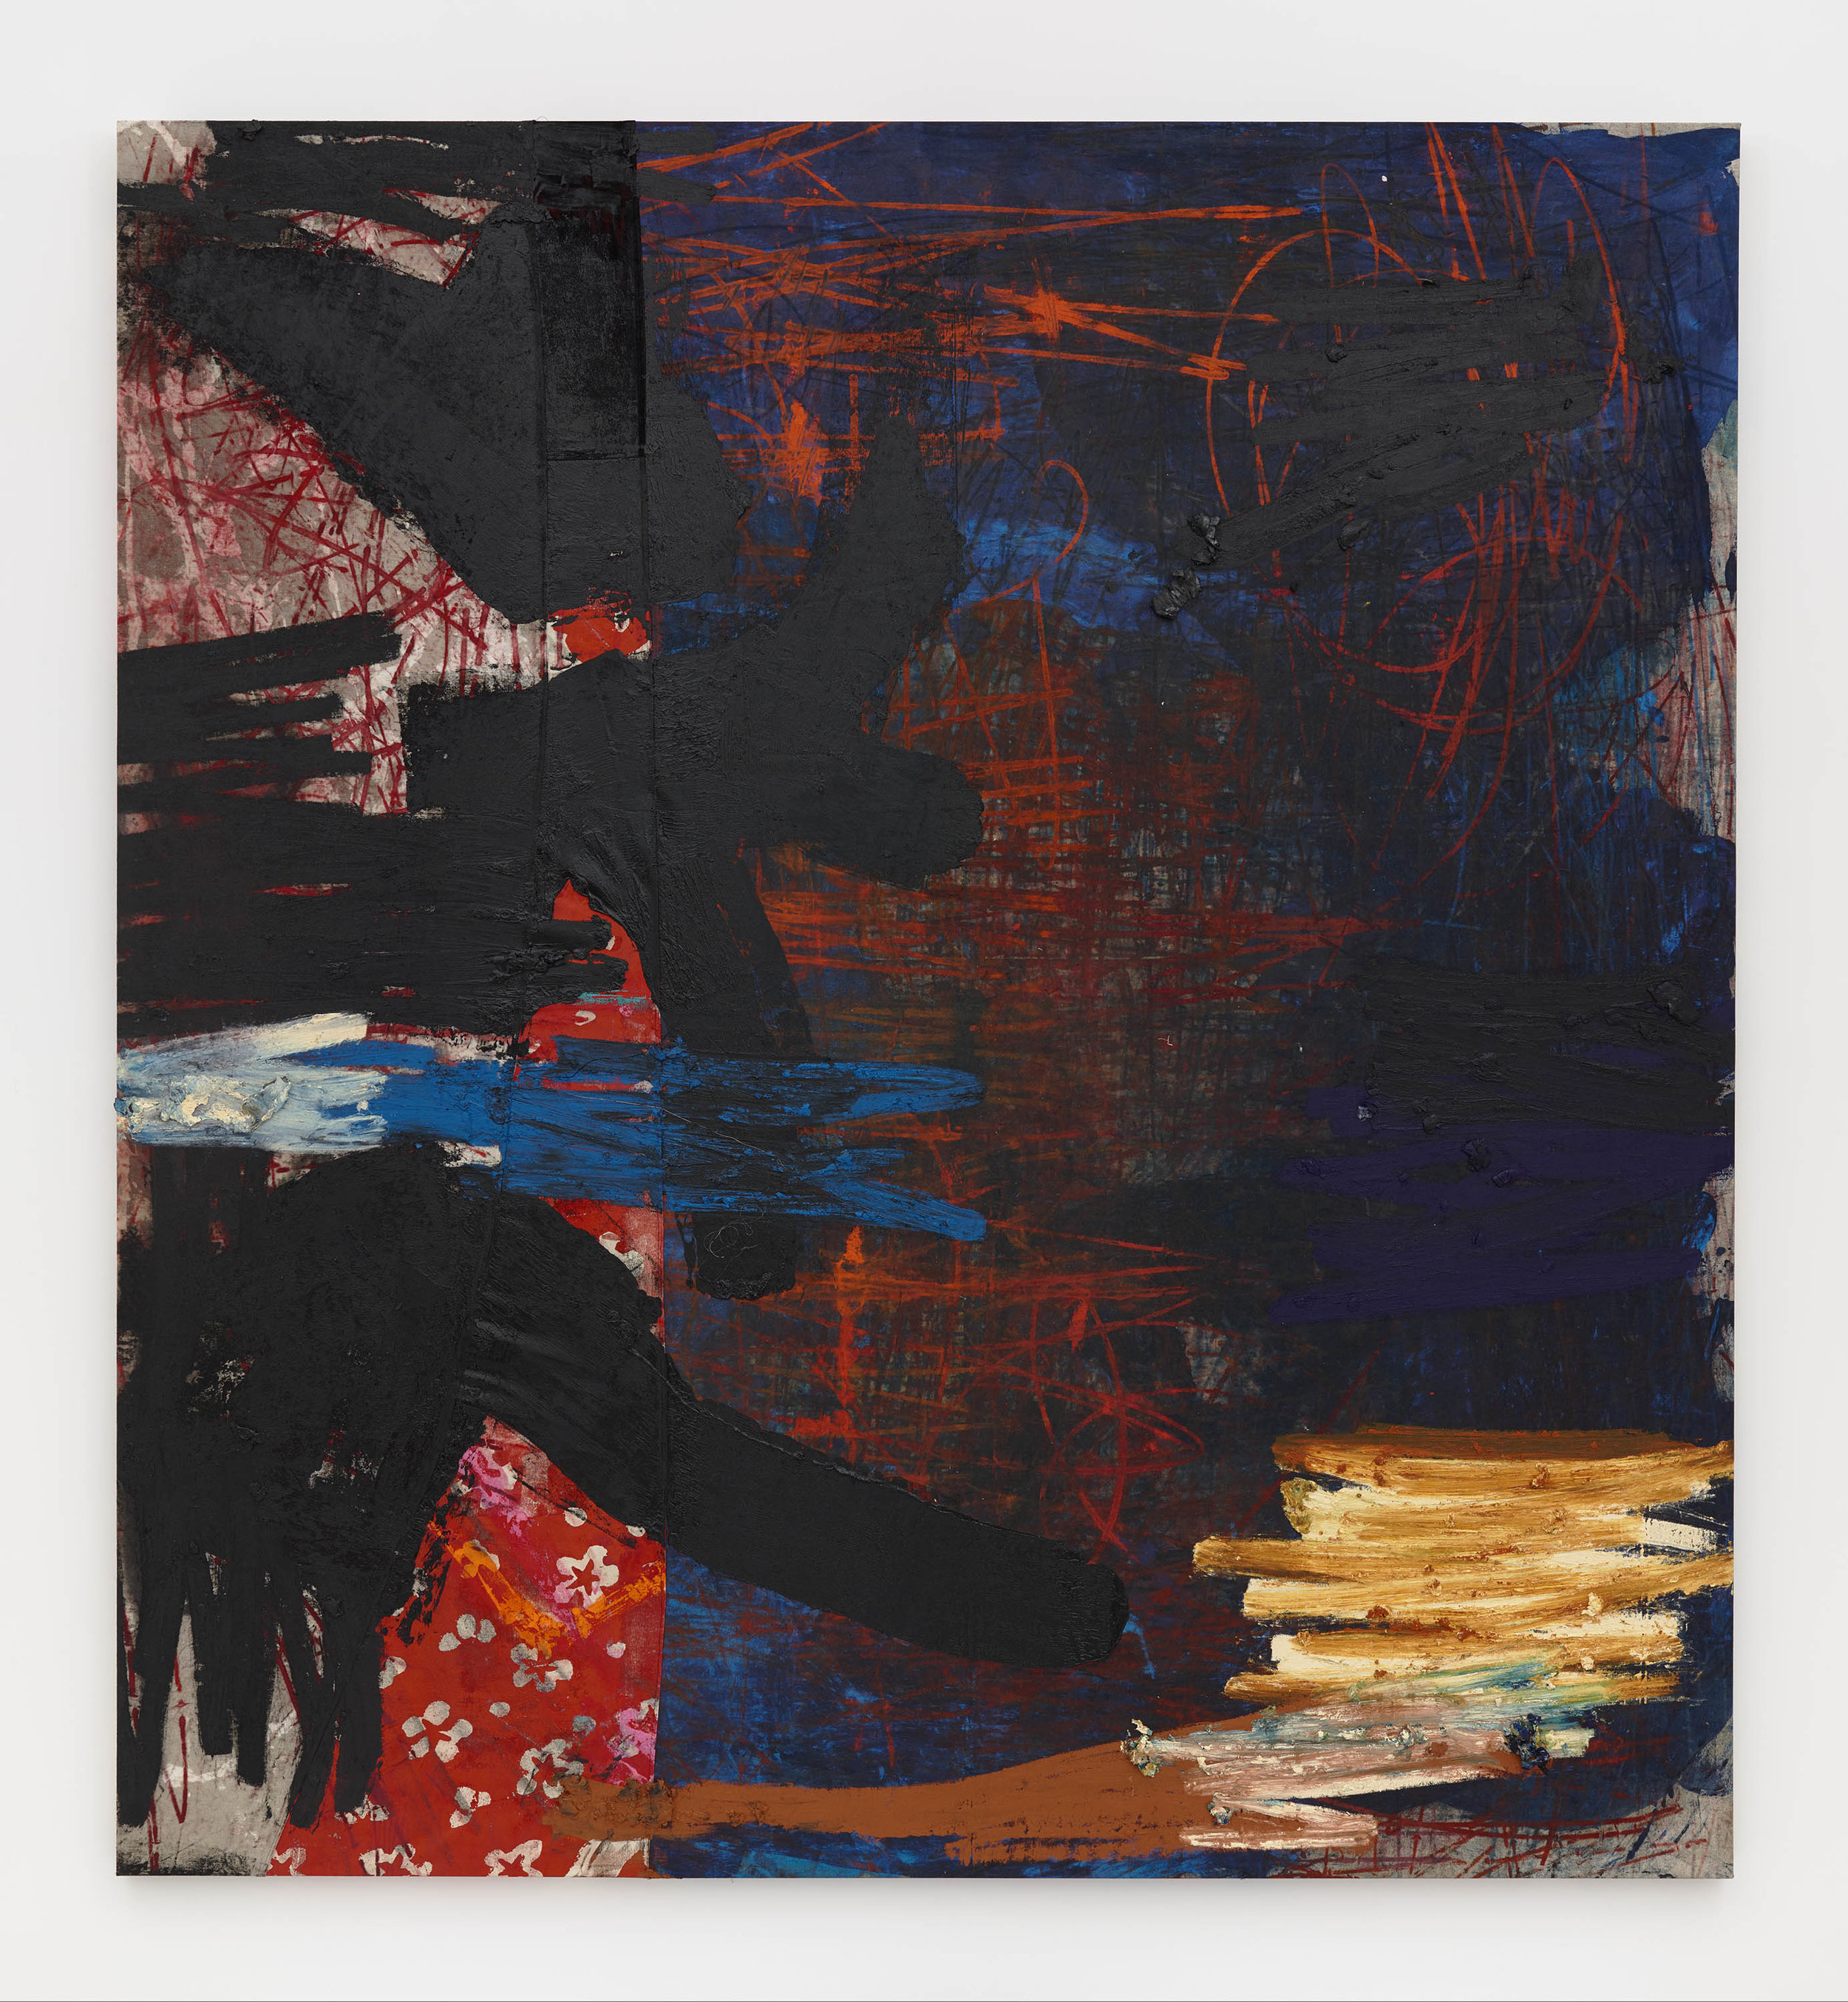   Oscar Murillo,   manifestation , 2019, Oil, oil stick and spray paint on canvas, linen and velvet, 102 3/8 x 94 1/2 inches, 260 x 240 cm 